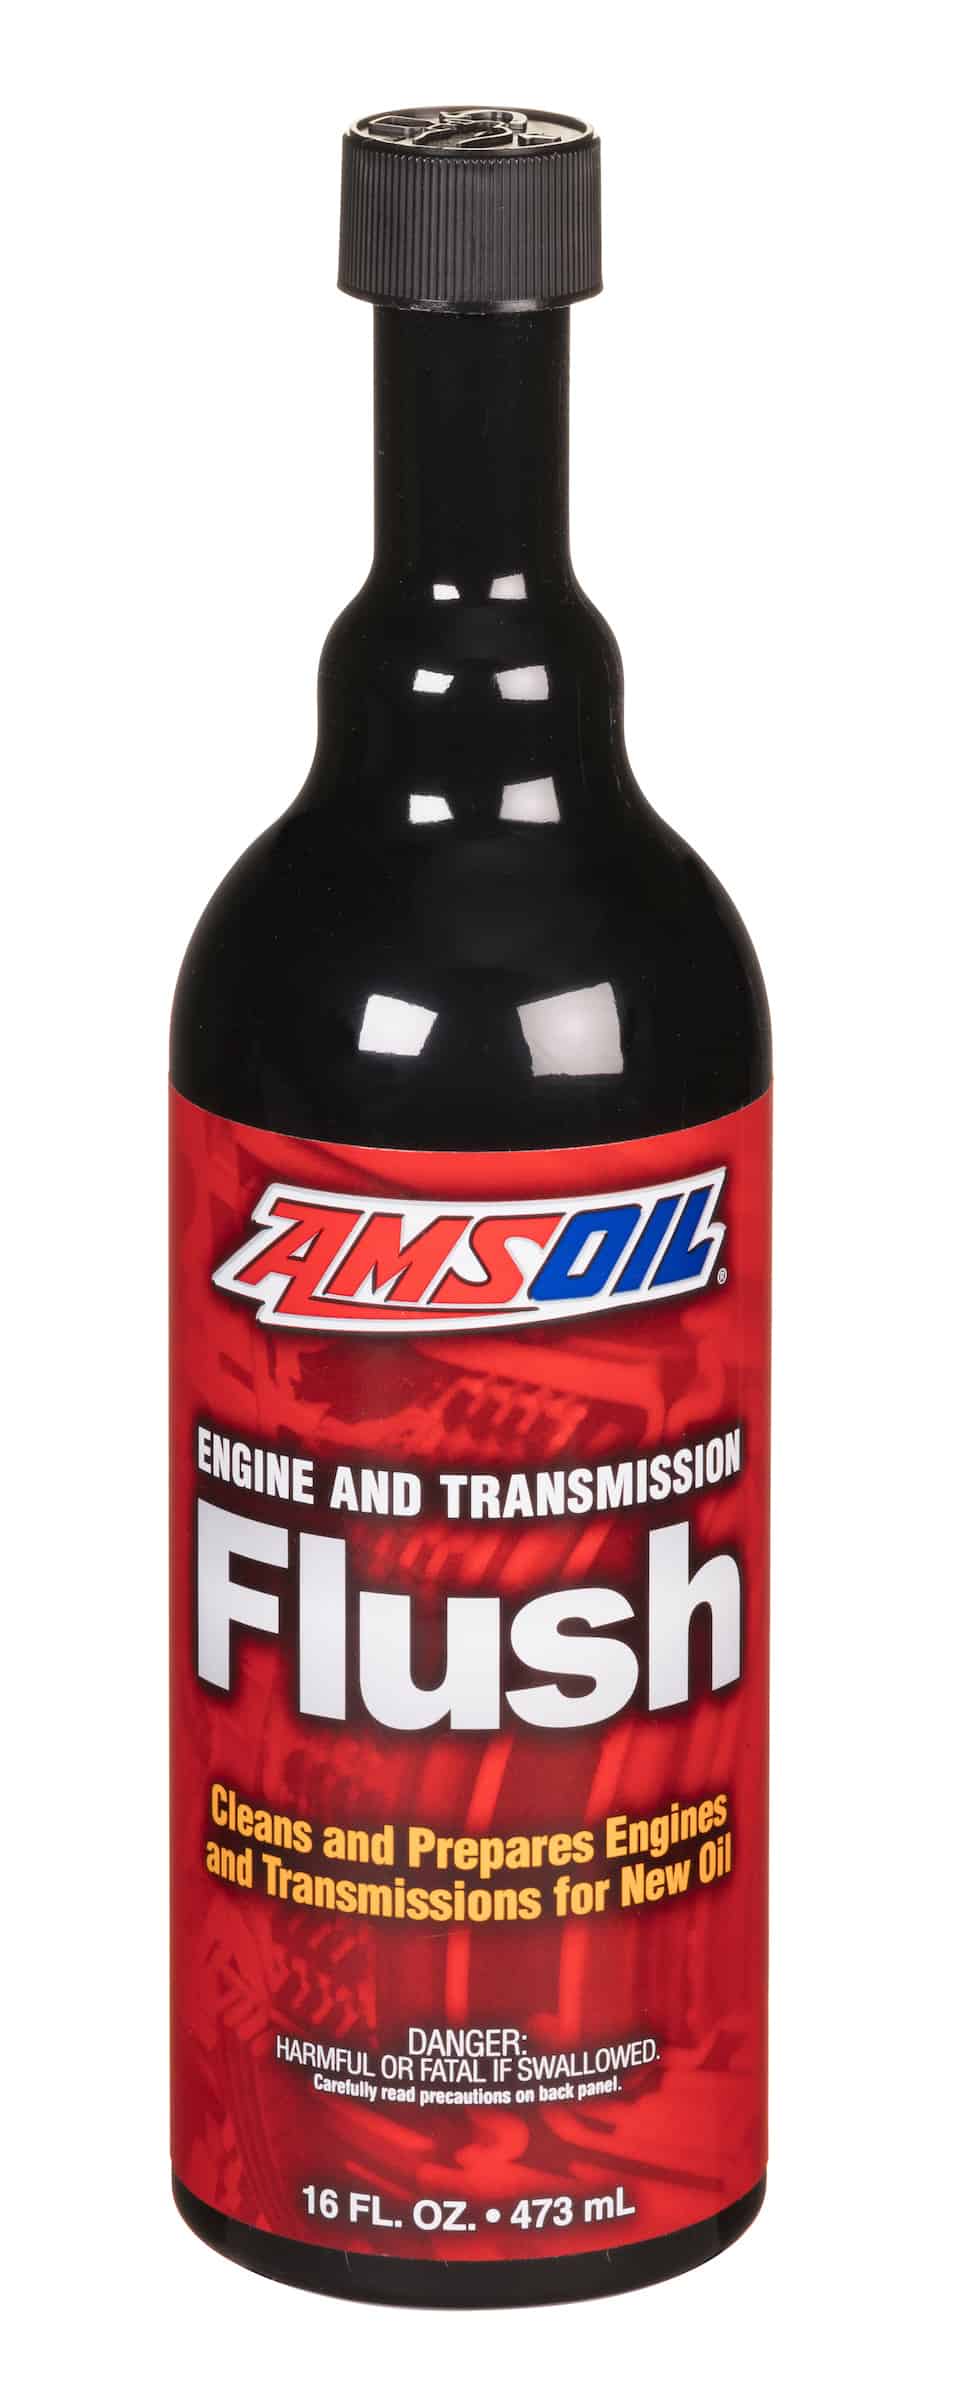 A bottle of AMSOIL Engine & Transmission Flush, which helps to restore fuel economy, increases operating efficiency, reduces emissions in gasoline and diesel engines. The engine flush is engineered for both gasoline and diesel engines.